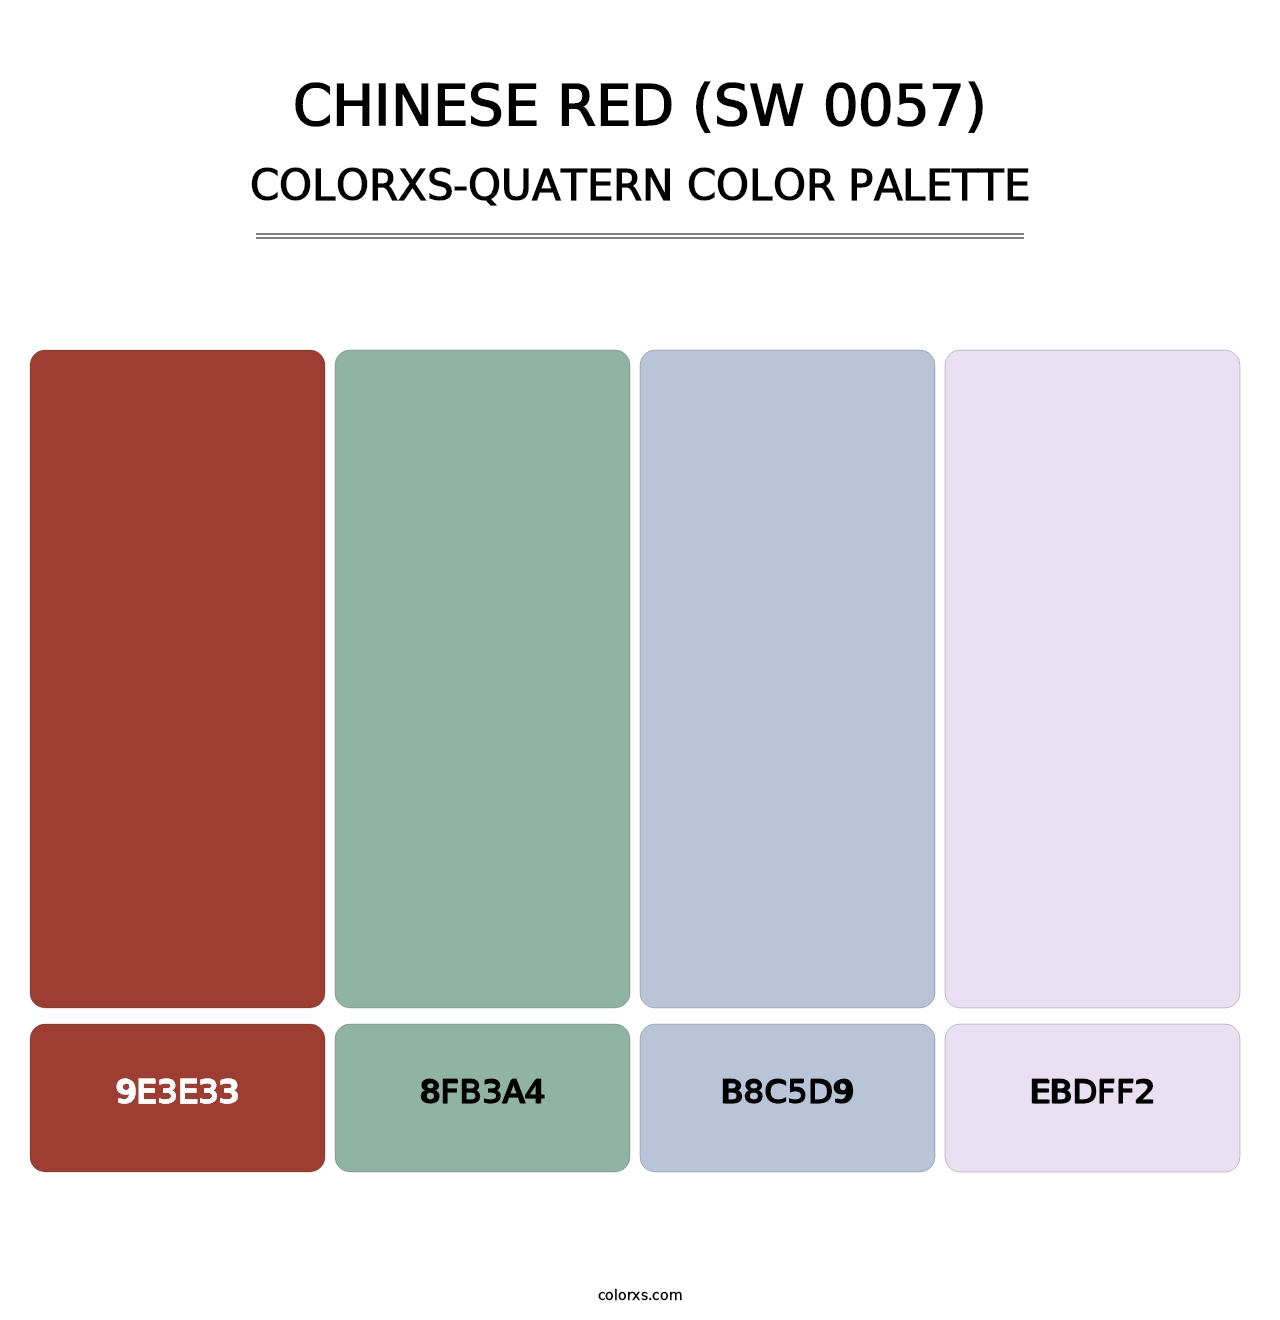 Chinese Red (SW 0057) - Colorxs Quatern Palette